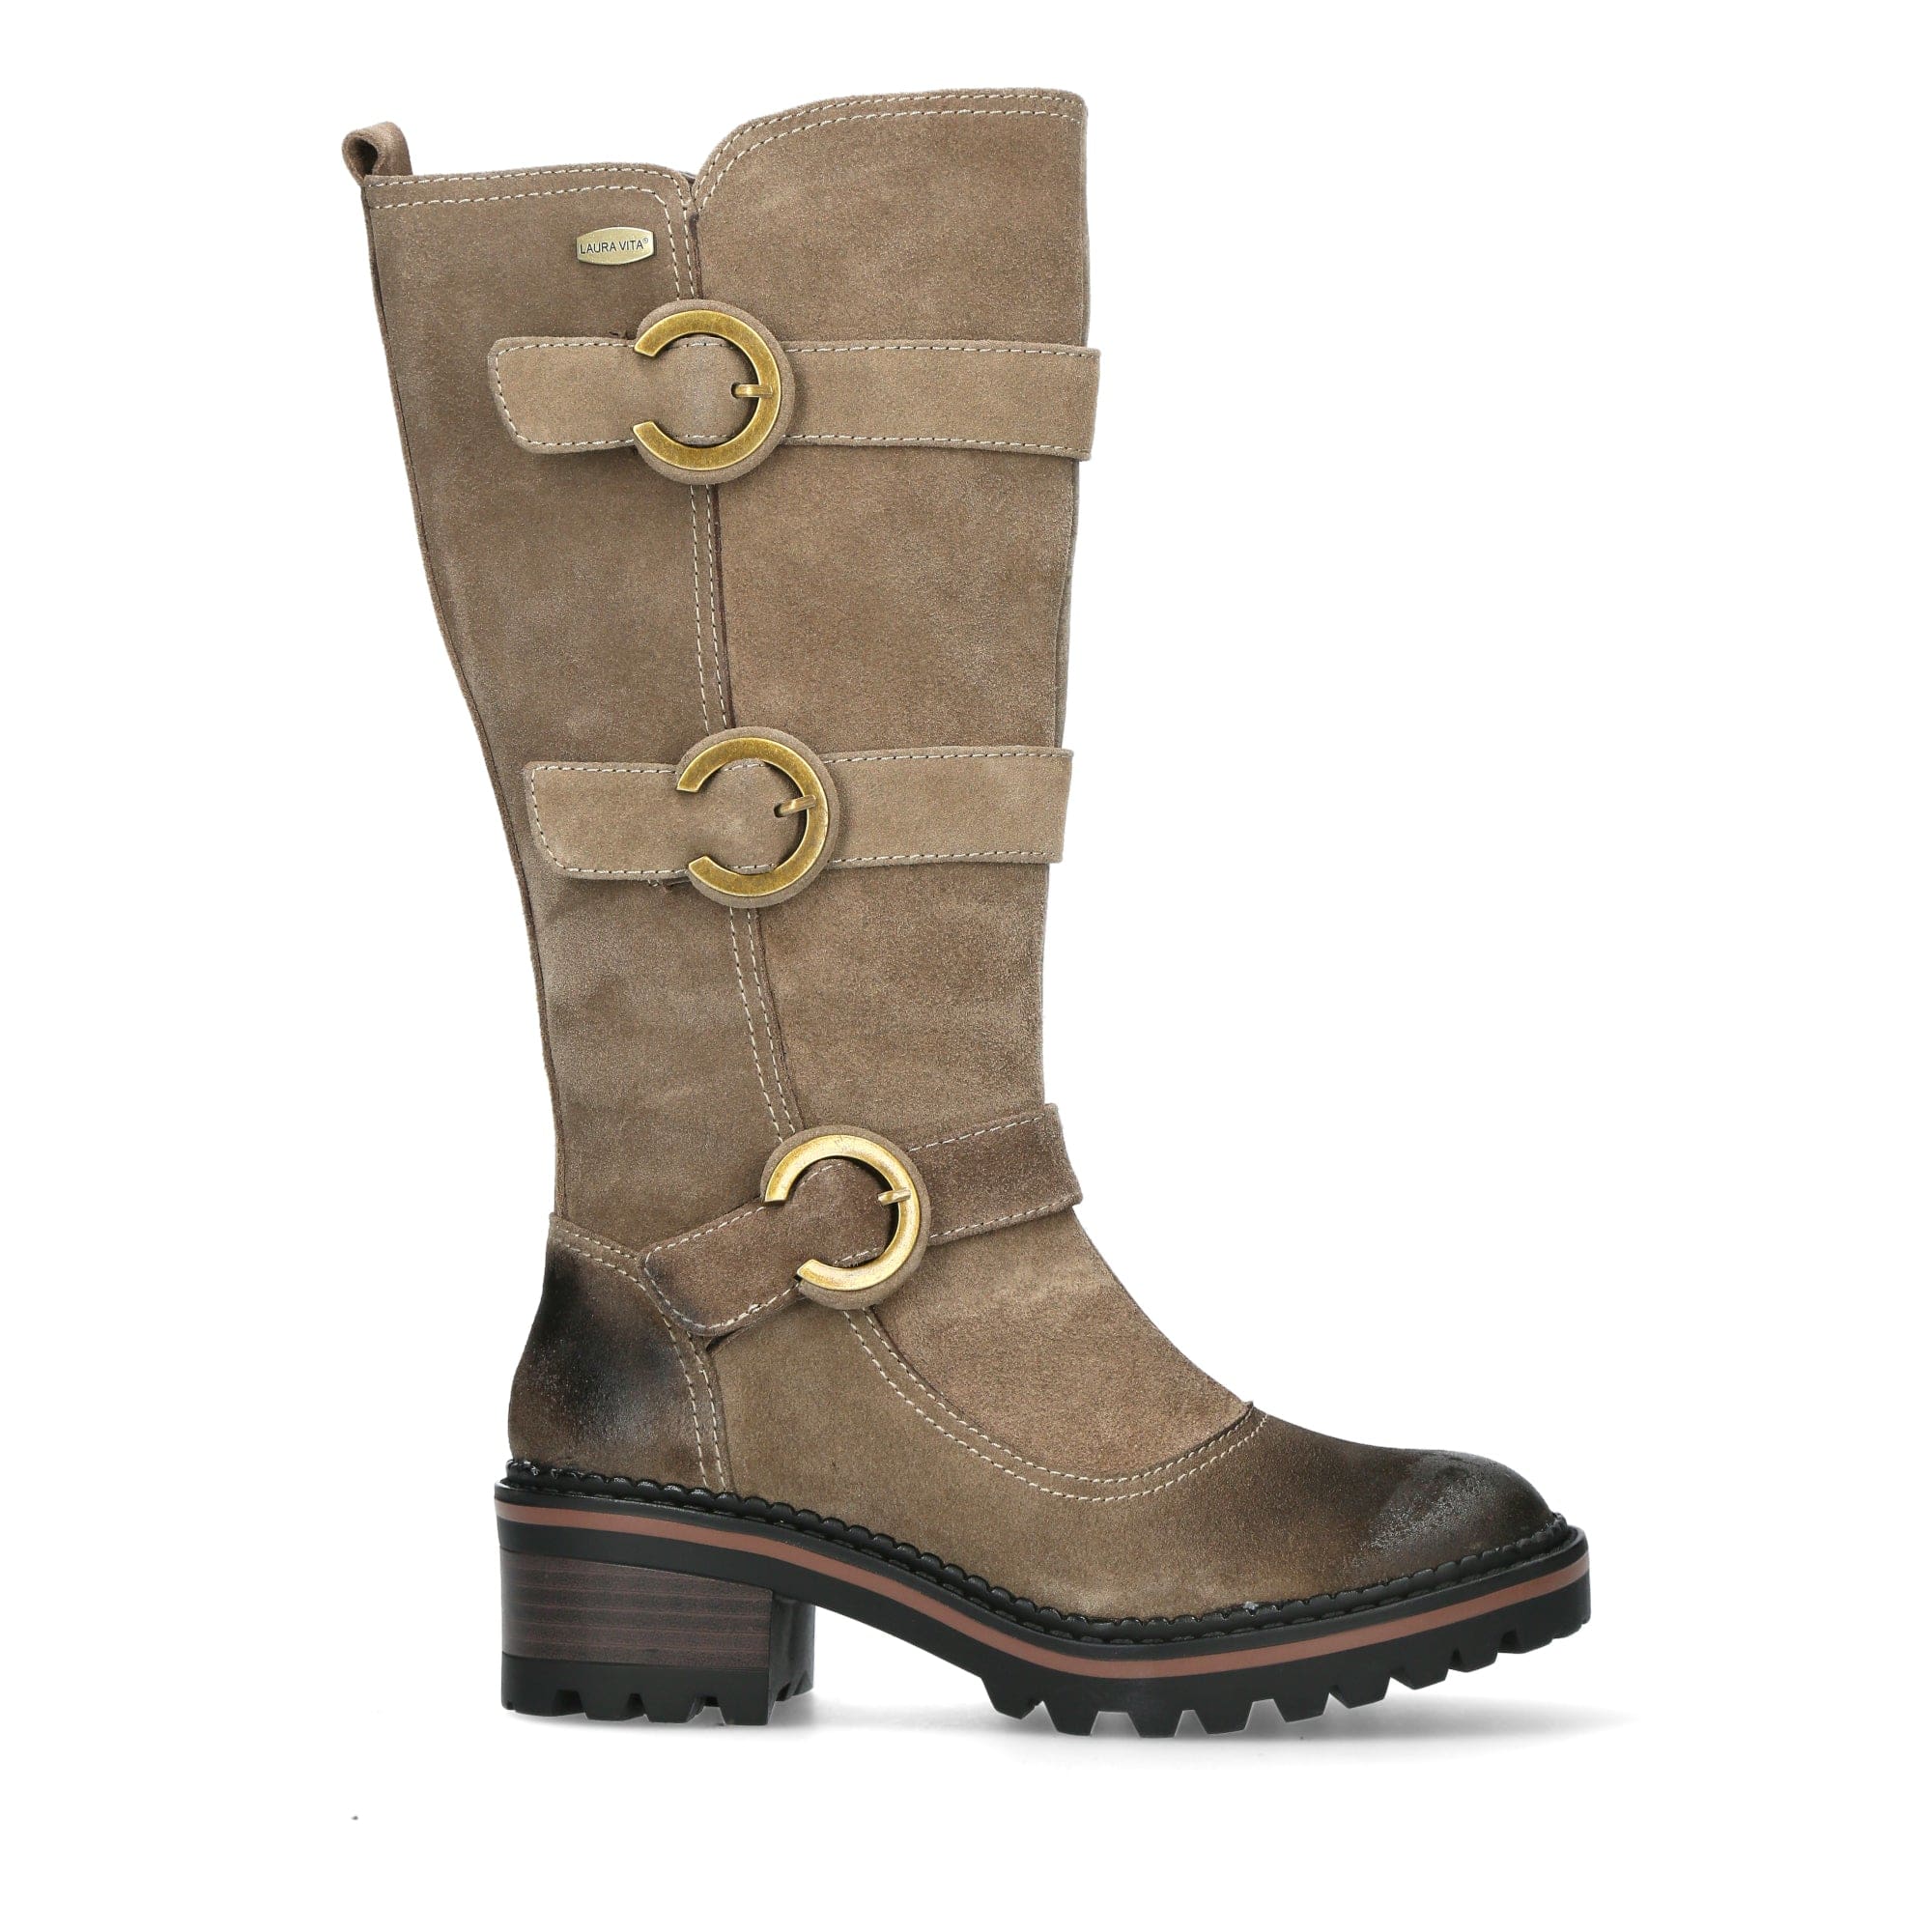 Schuh KESSO 08 - 35 / Taupe - Stiefel